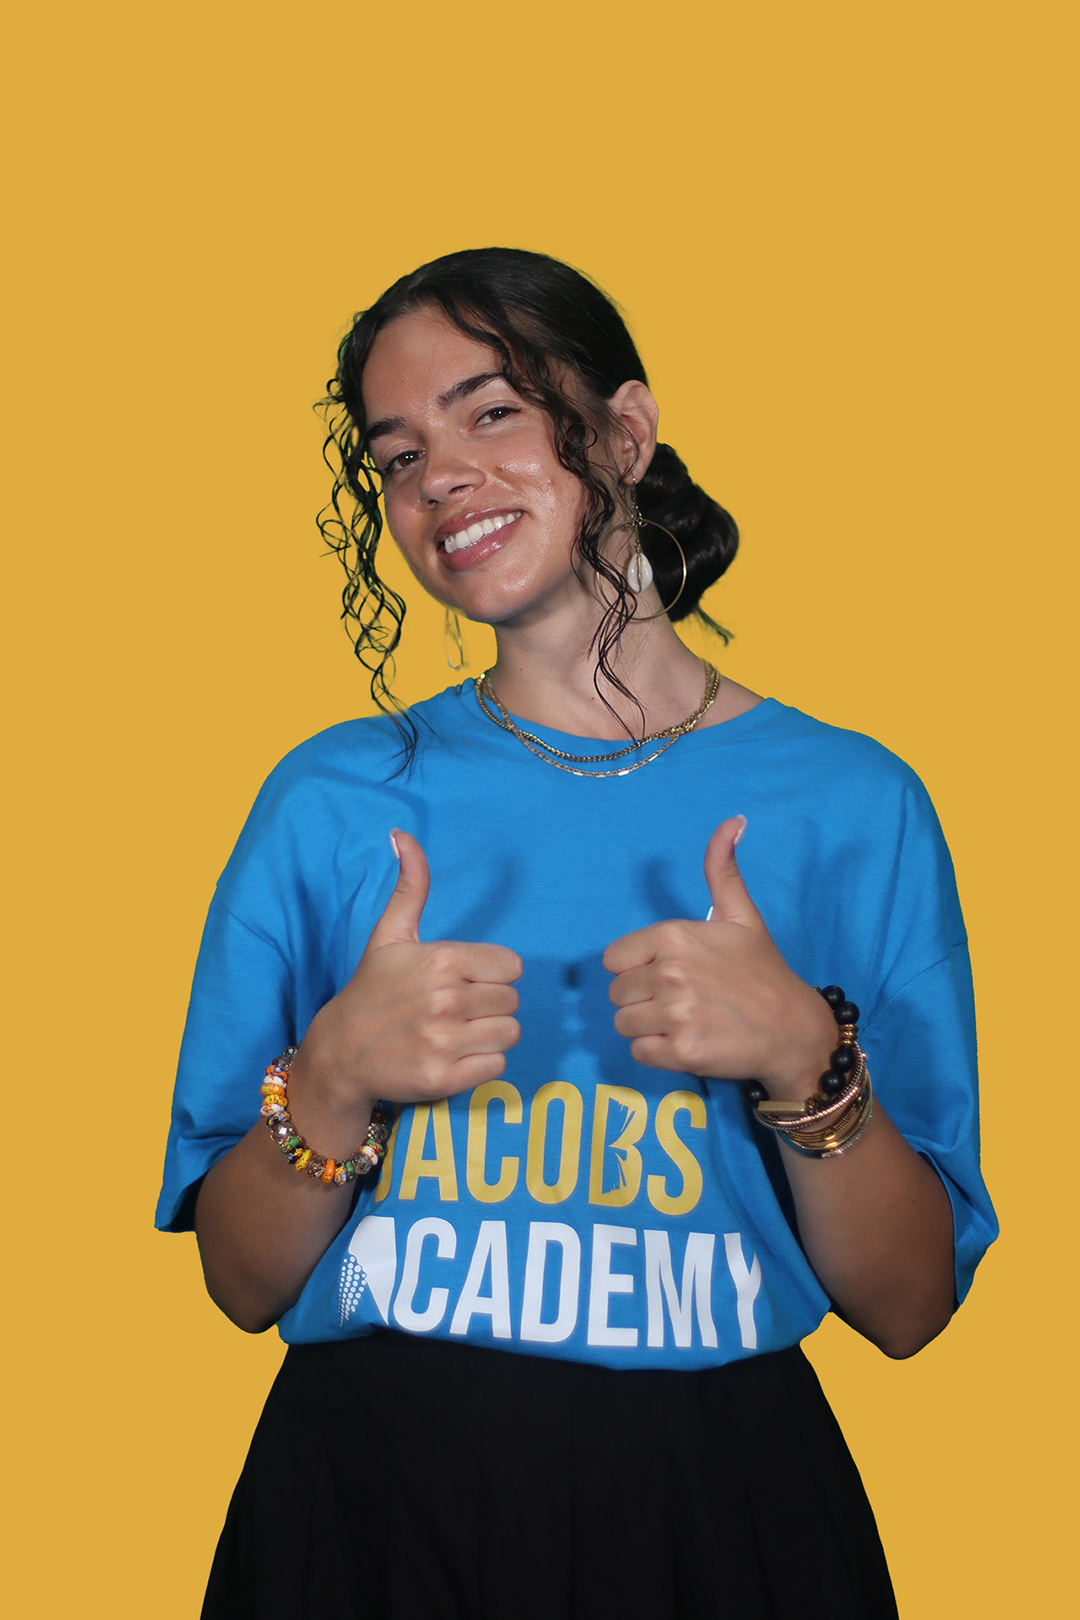 About Jacobs Academy